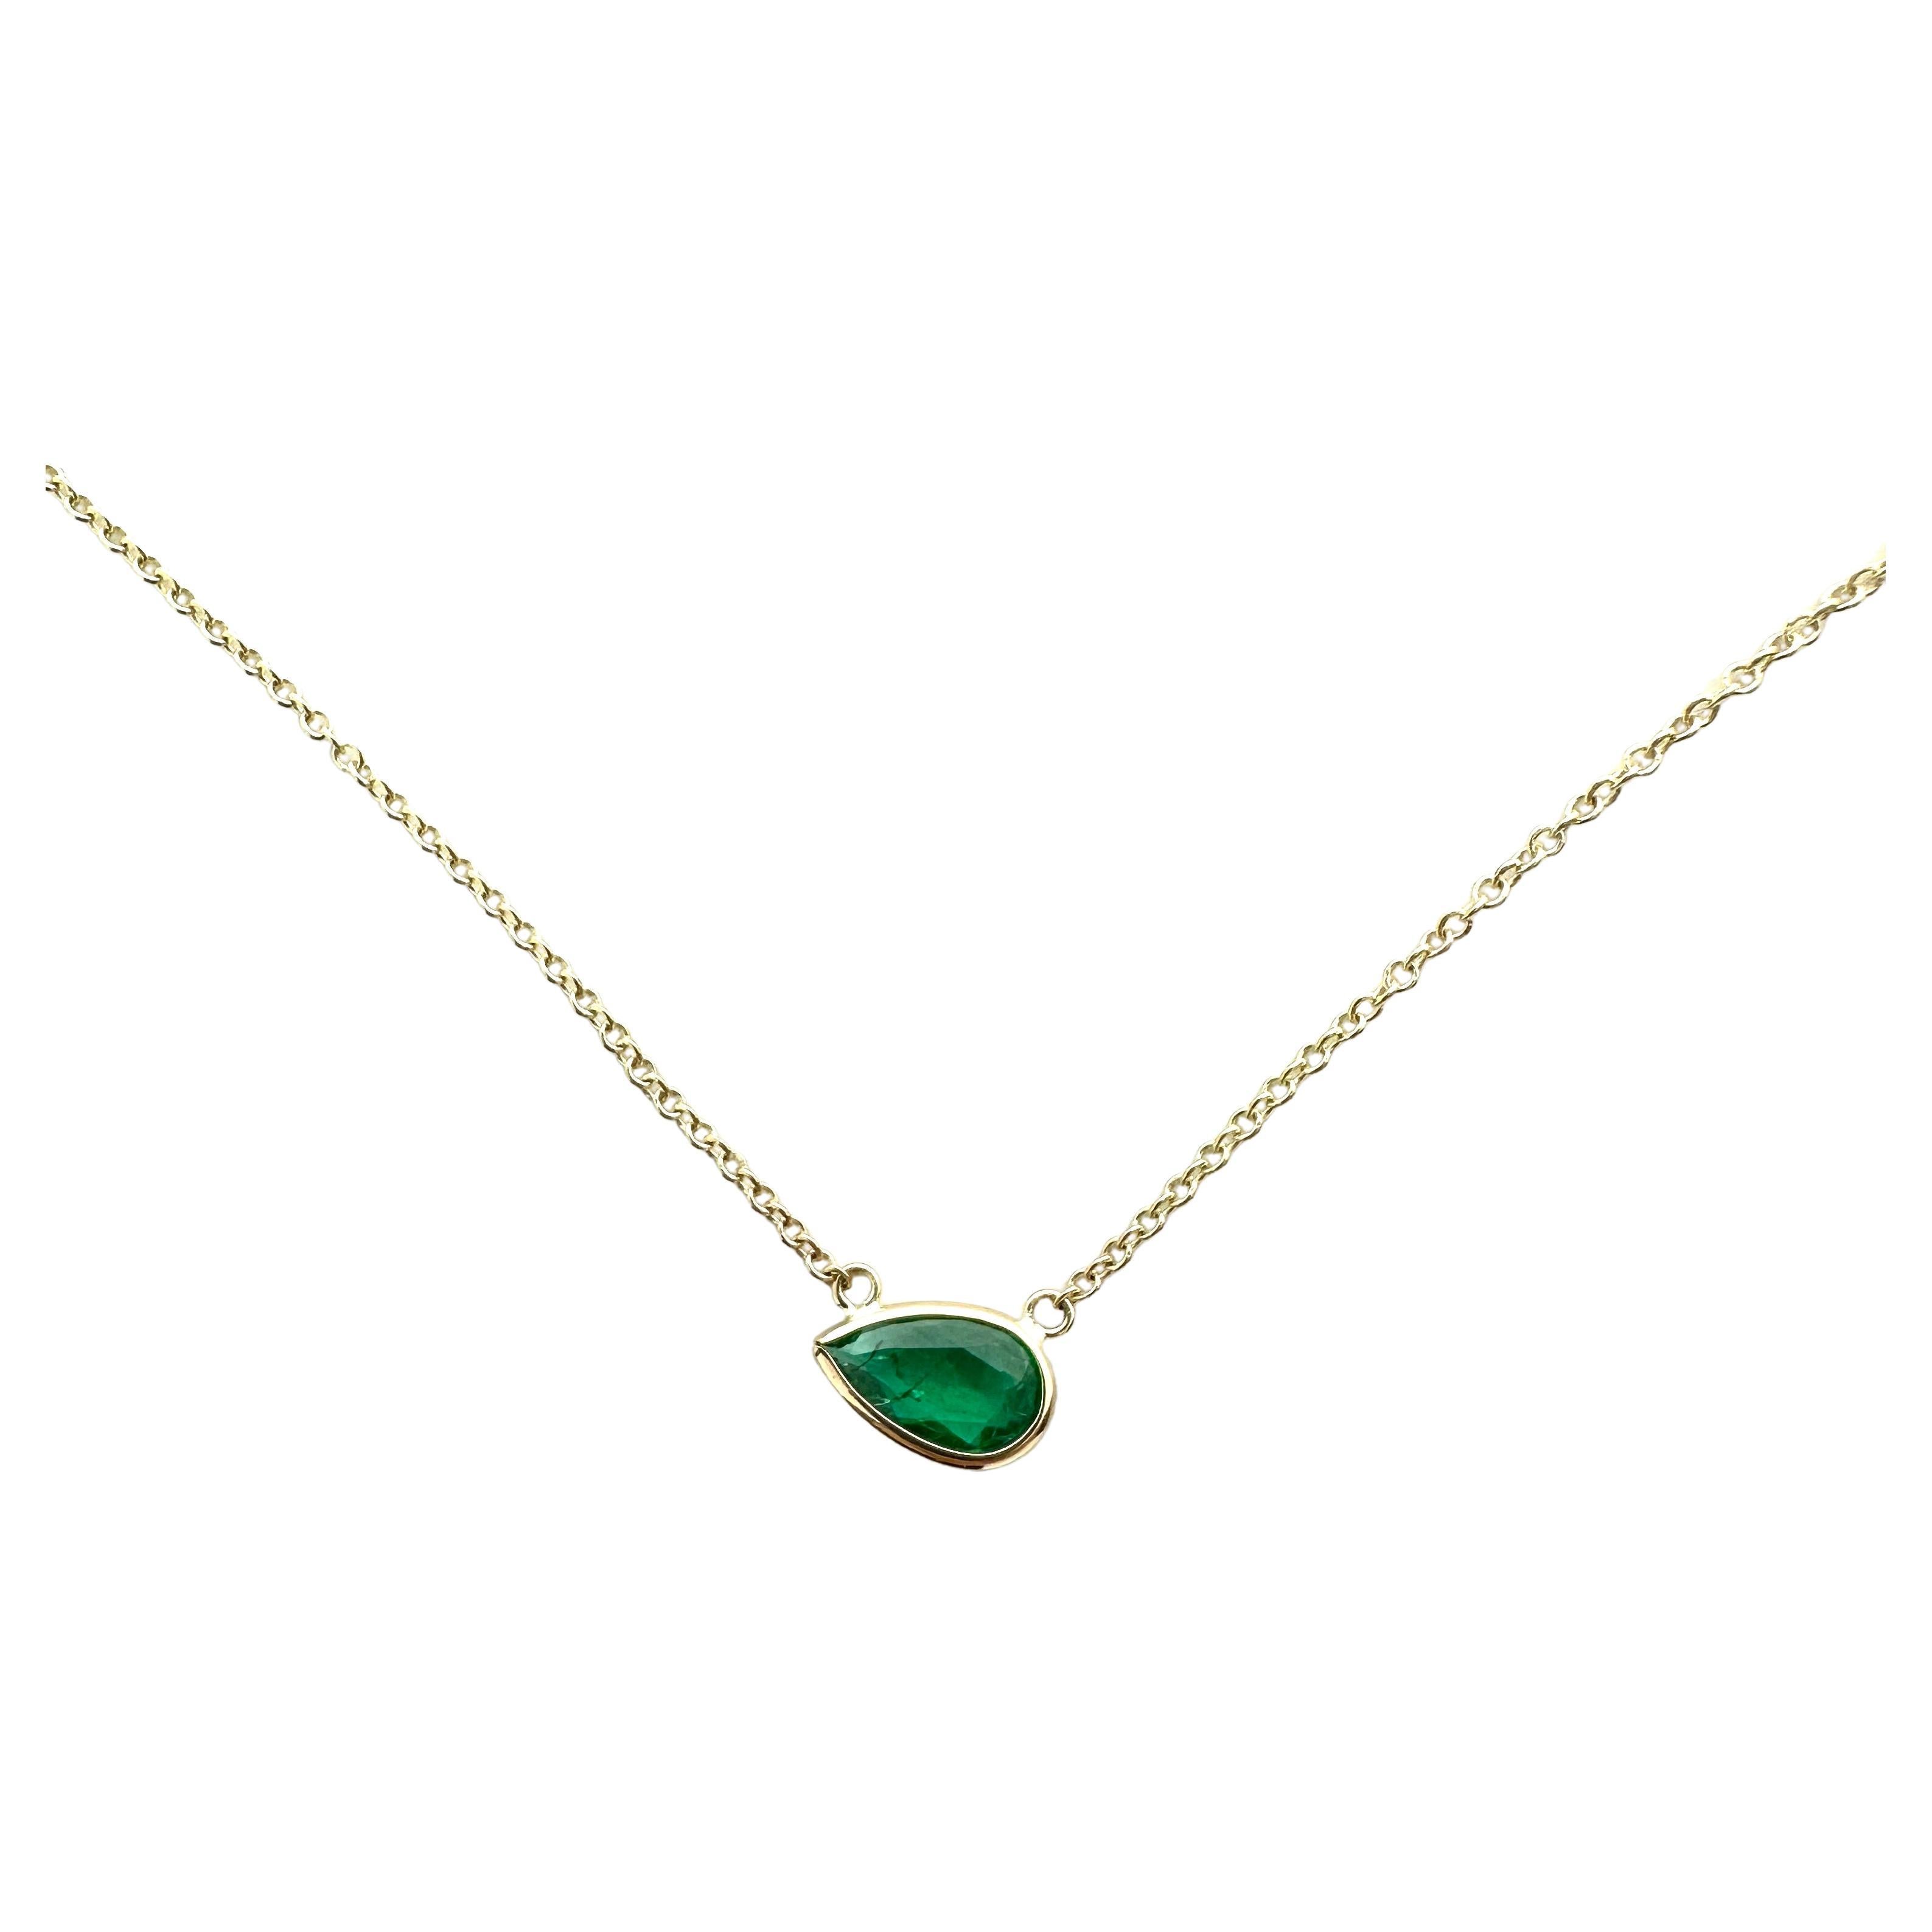 0.90 Carat Weight Green Emerald Pear Cut Solitaire Necklace in 14k Yellow Gold